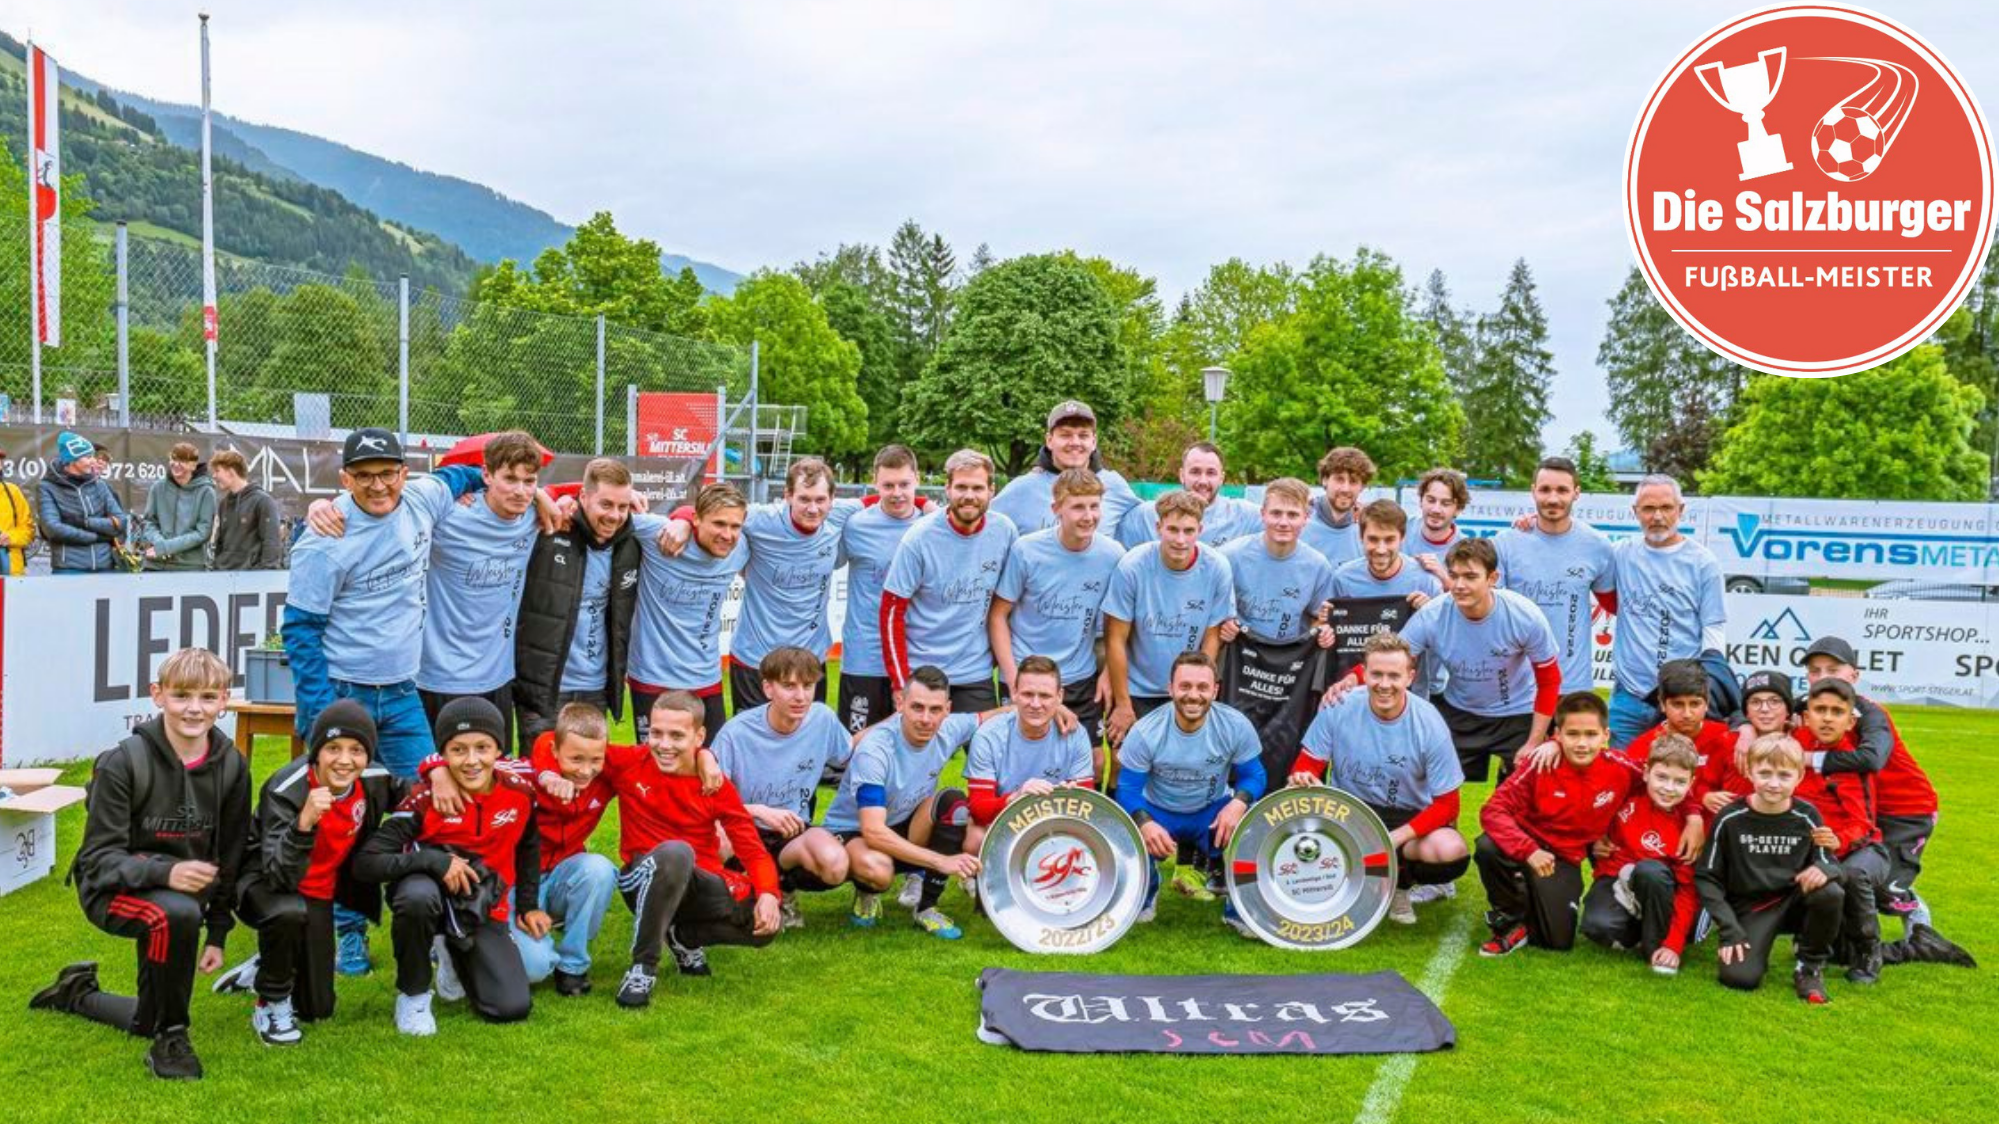 Mittersill's footballers stormed to the title and thus into the 1st national league. (Bild: SC Mittersill/Zeljko Brcina)